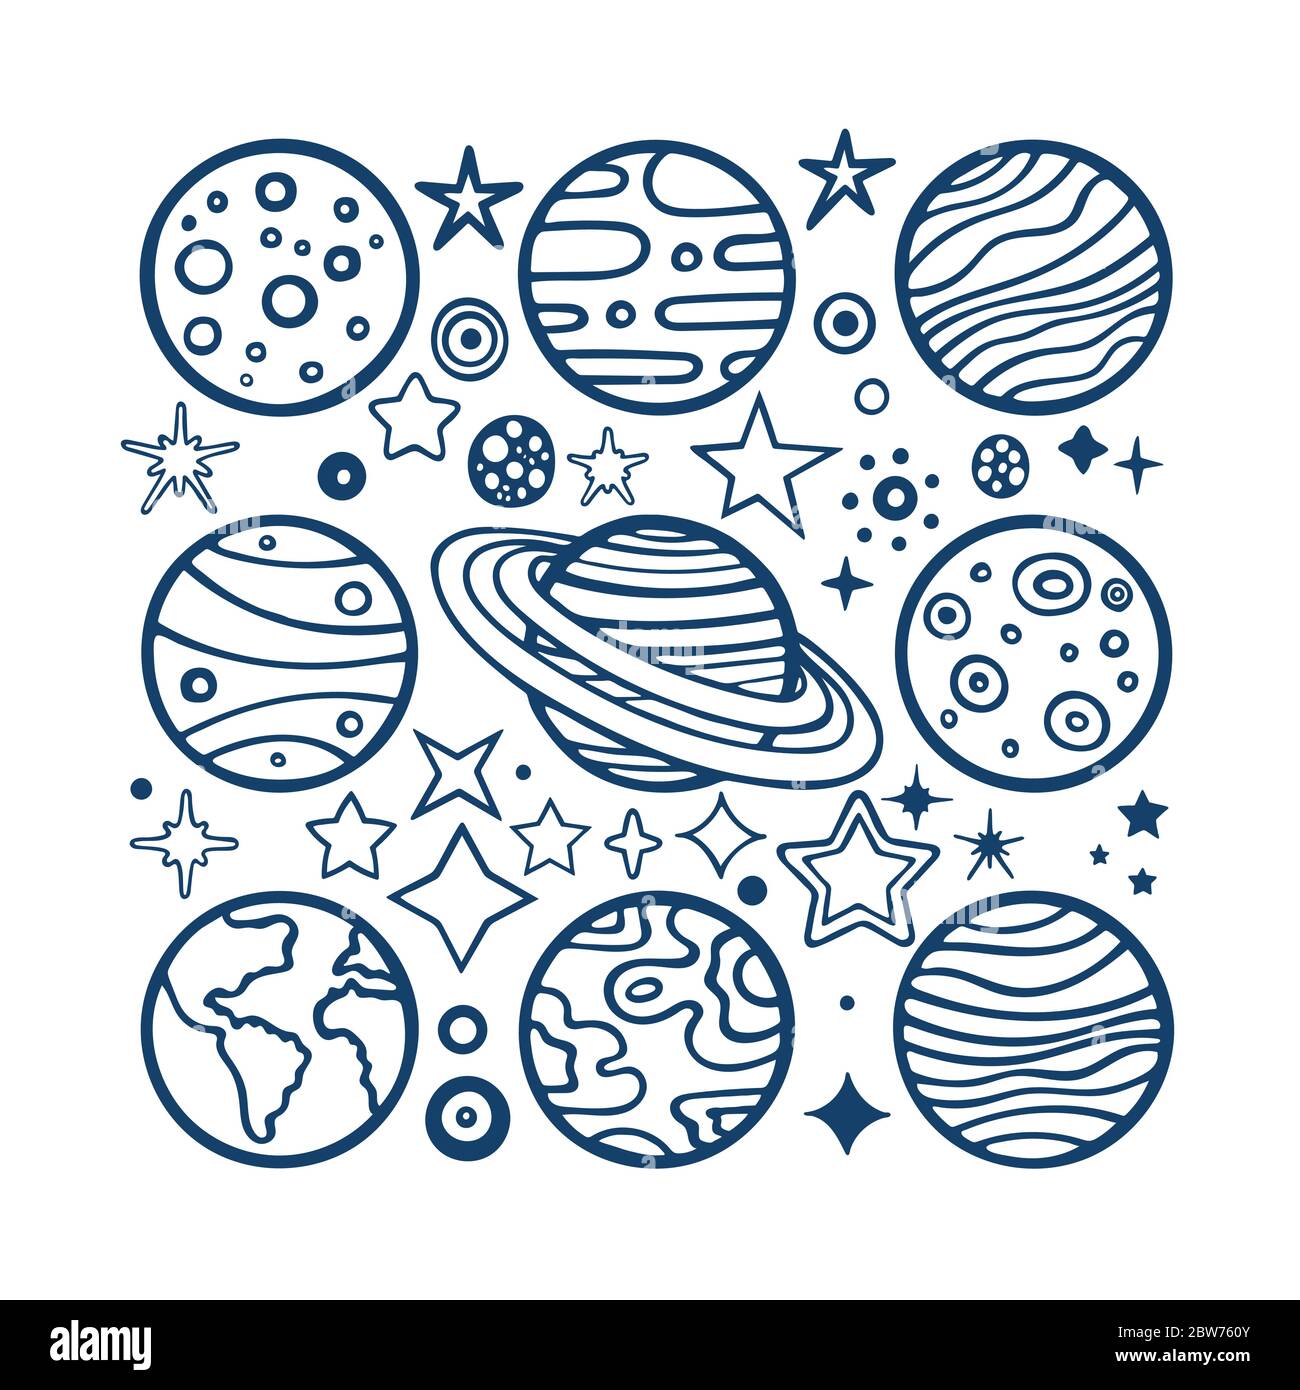 Planets and stars. Hand drawn planets and different shape stars vector illustration set. Planets sketch drawing. Doodle planets and stars. Part of set Stock Vector